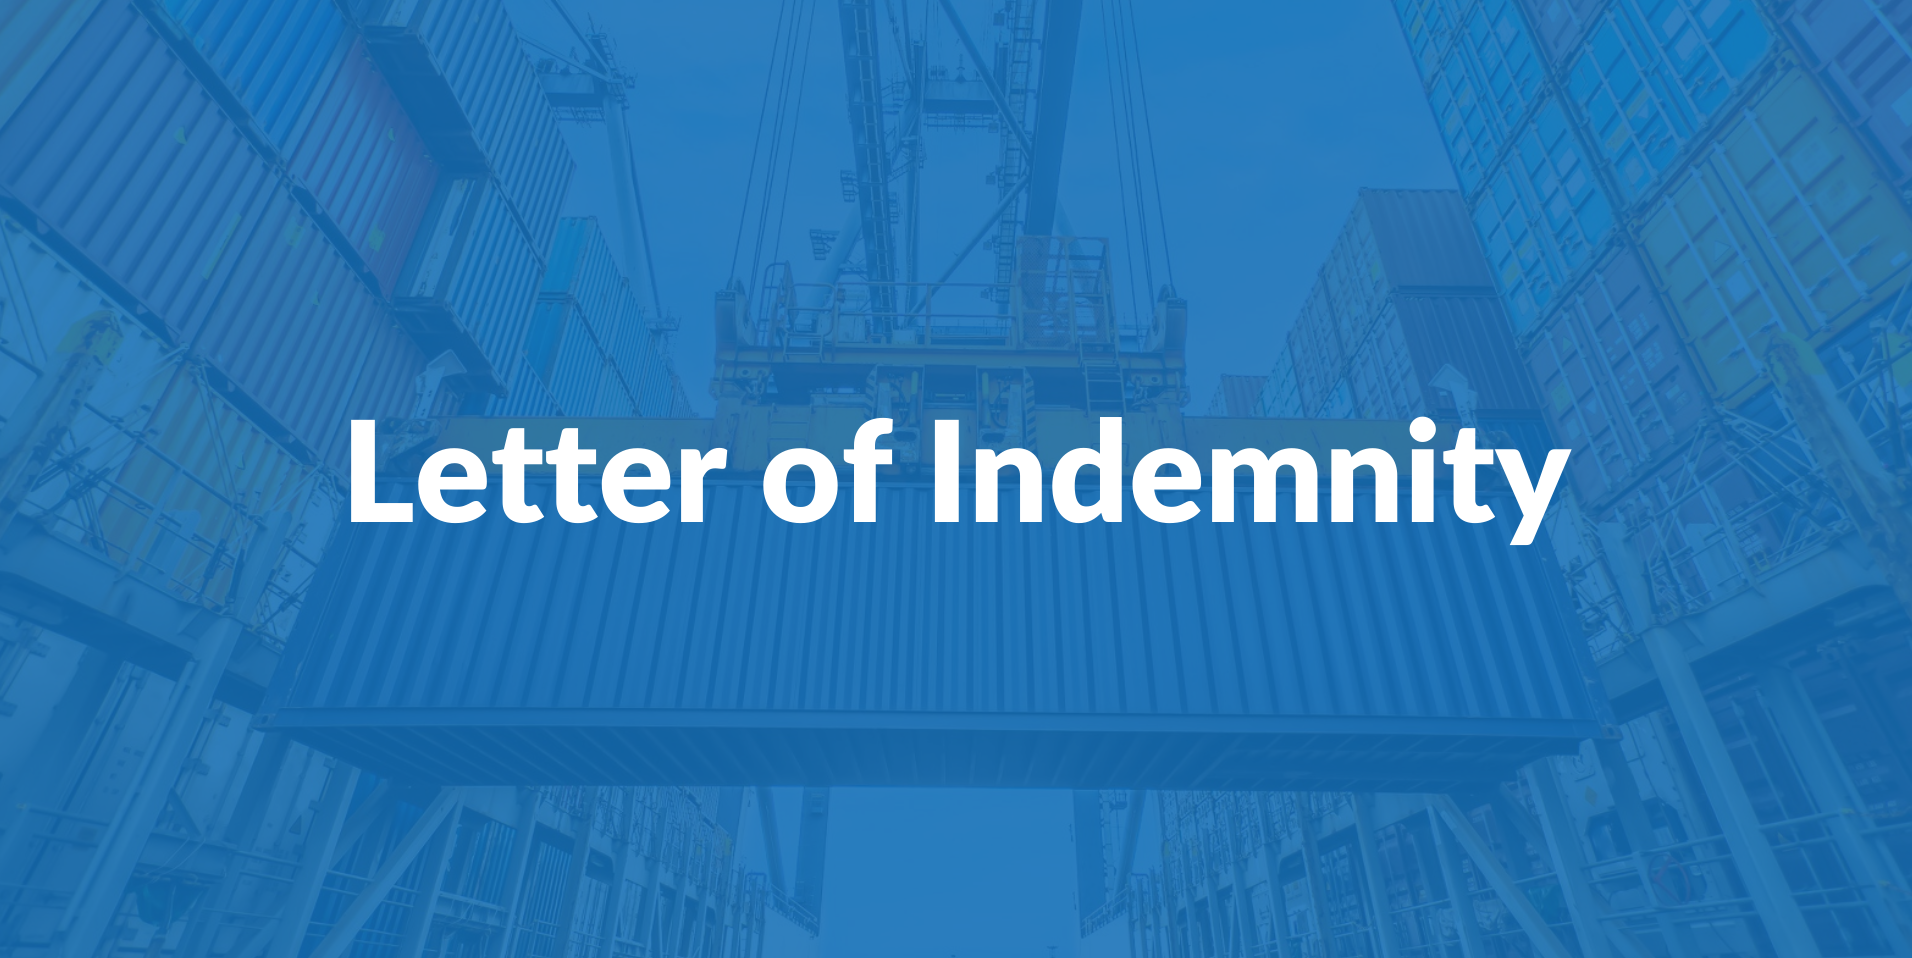 What is the Letter of Indemnity in Shipping?